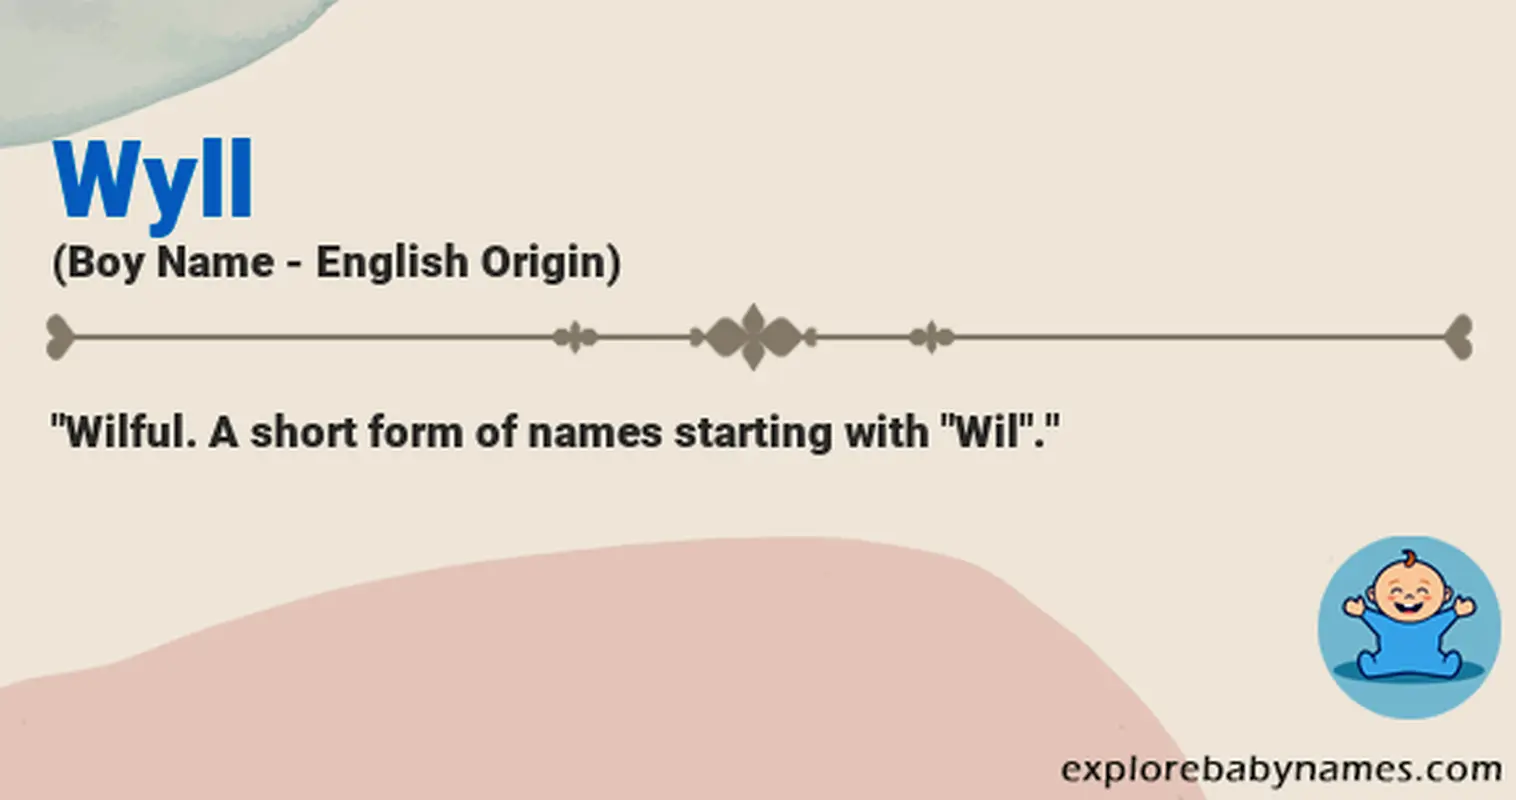 Meaning of Wyll